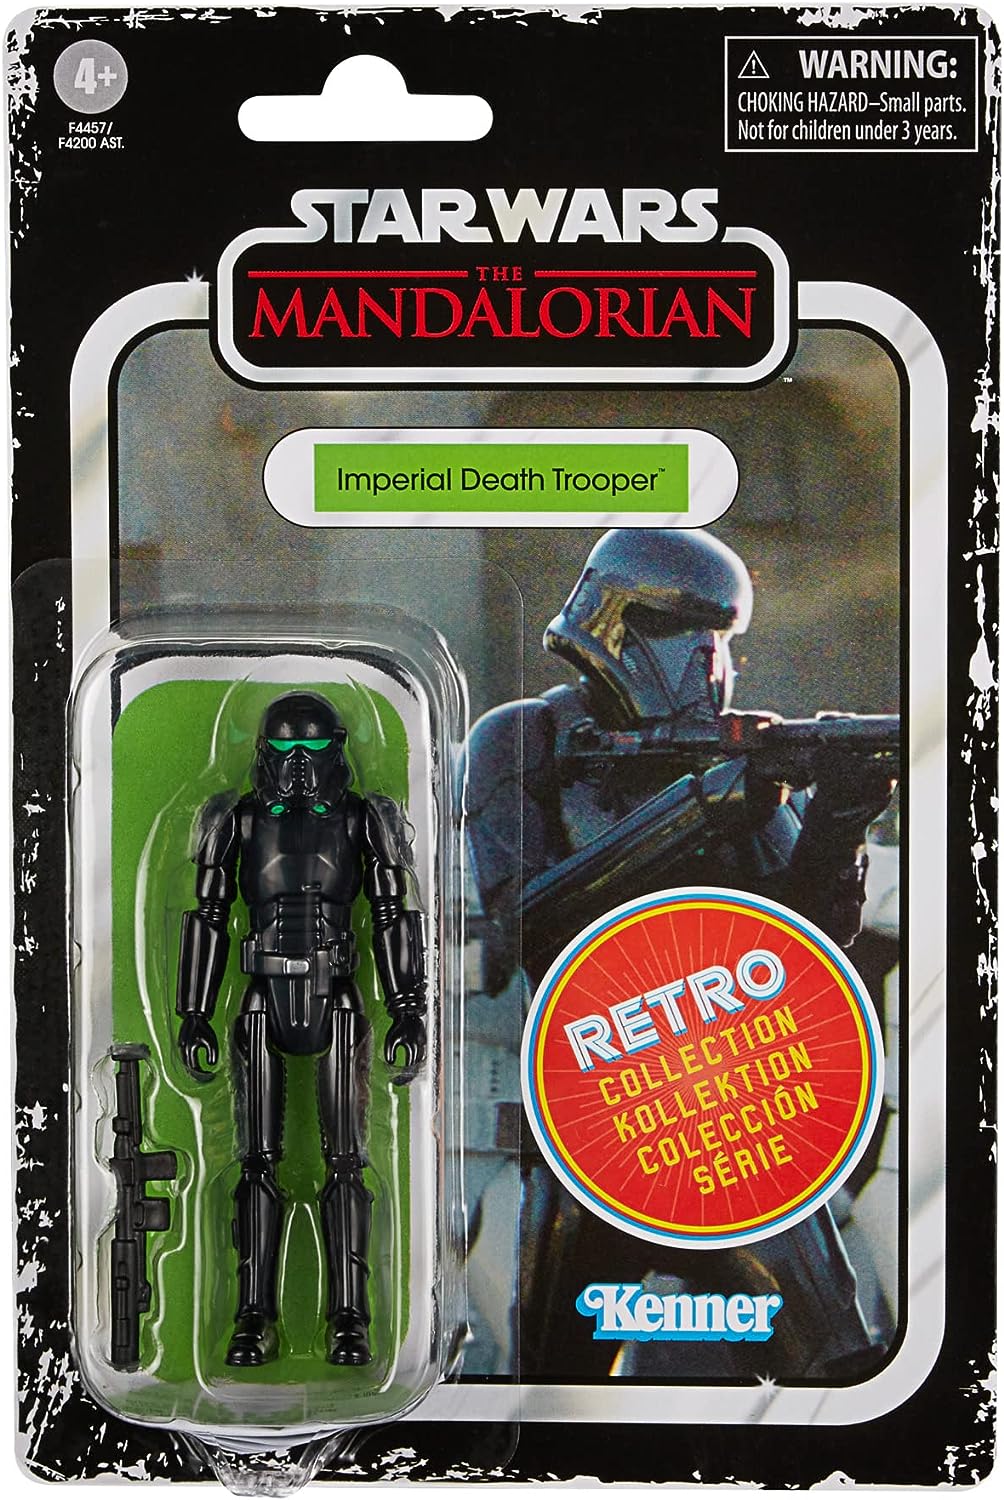 STAR WARS Retro Collection Imperial Death Trooper Toy 3.75-Inch-Scale The Mandalorian Collectible Action Figure